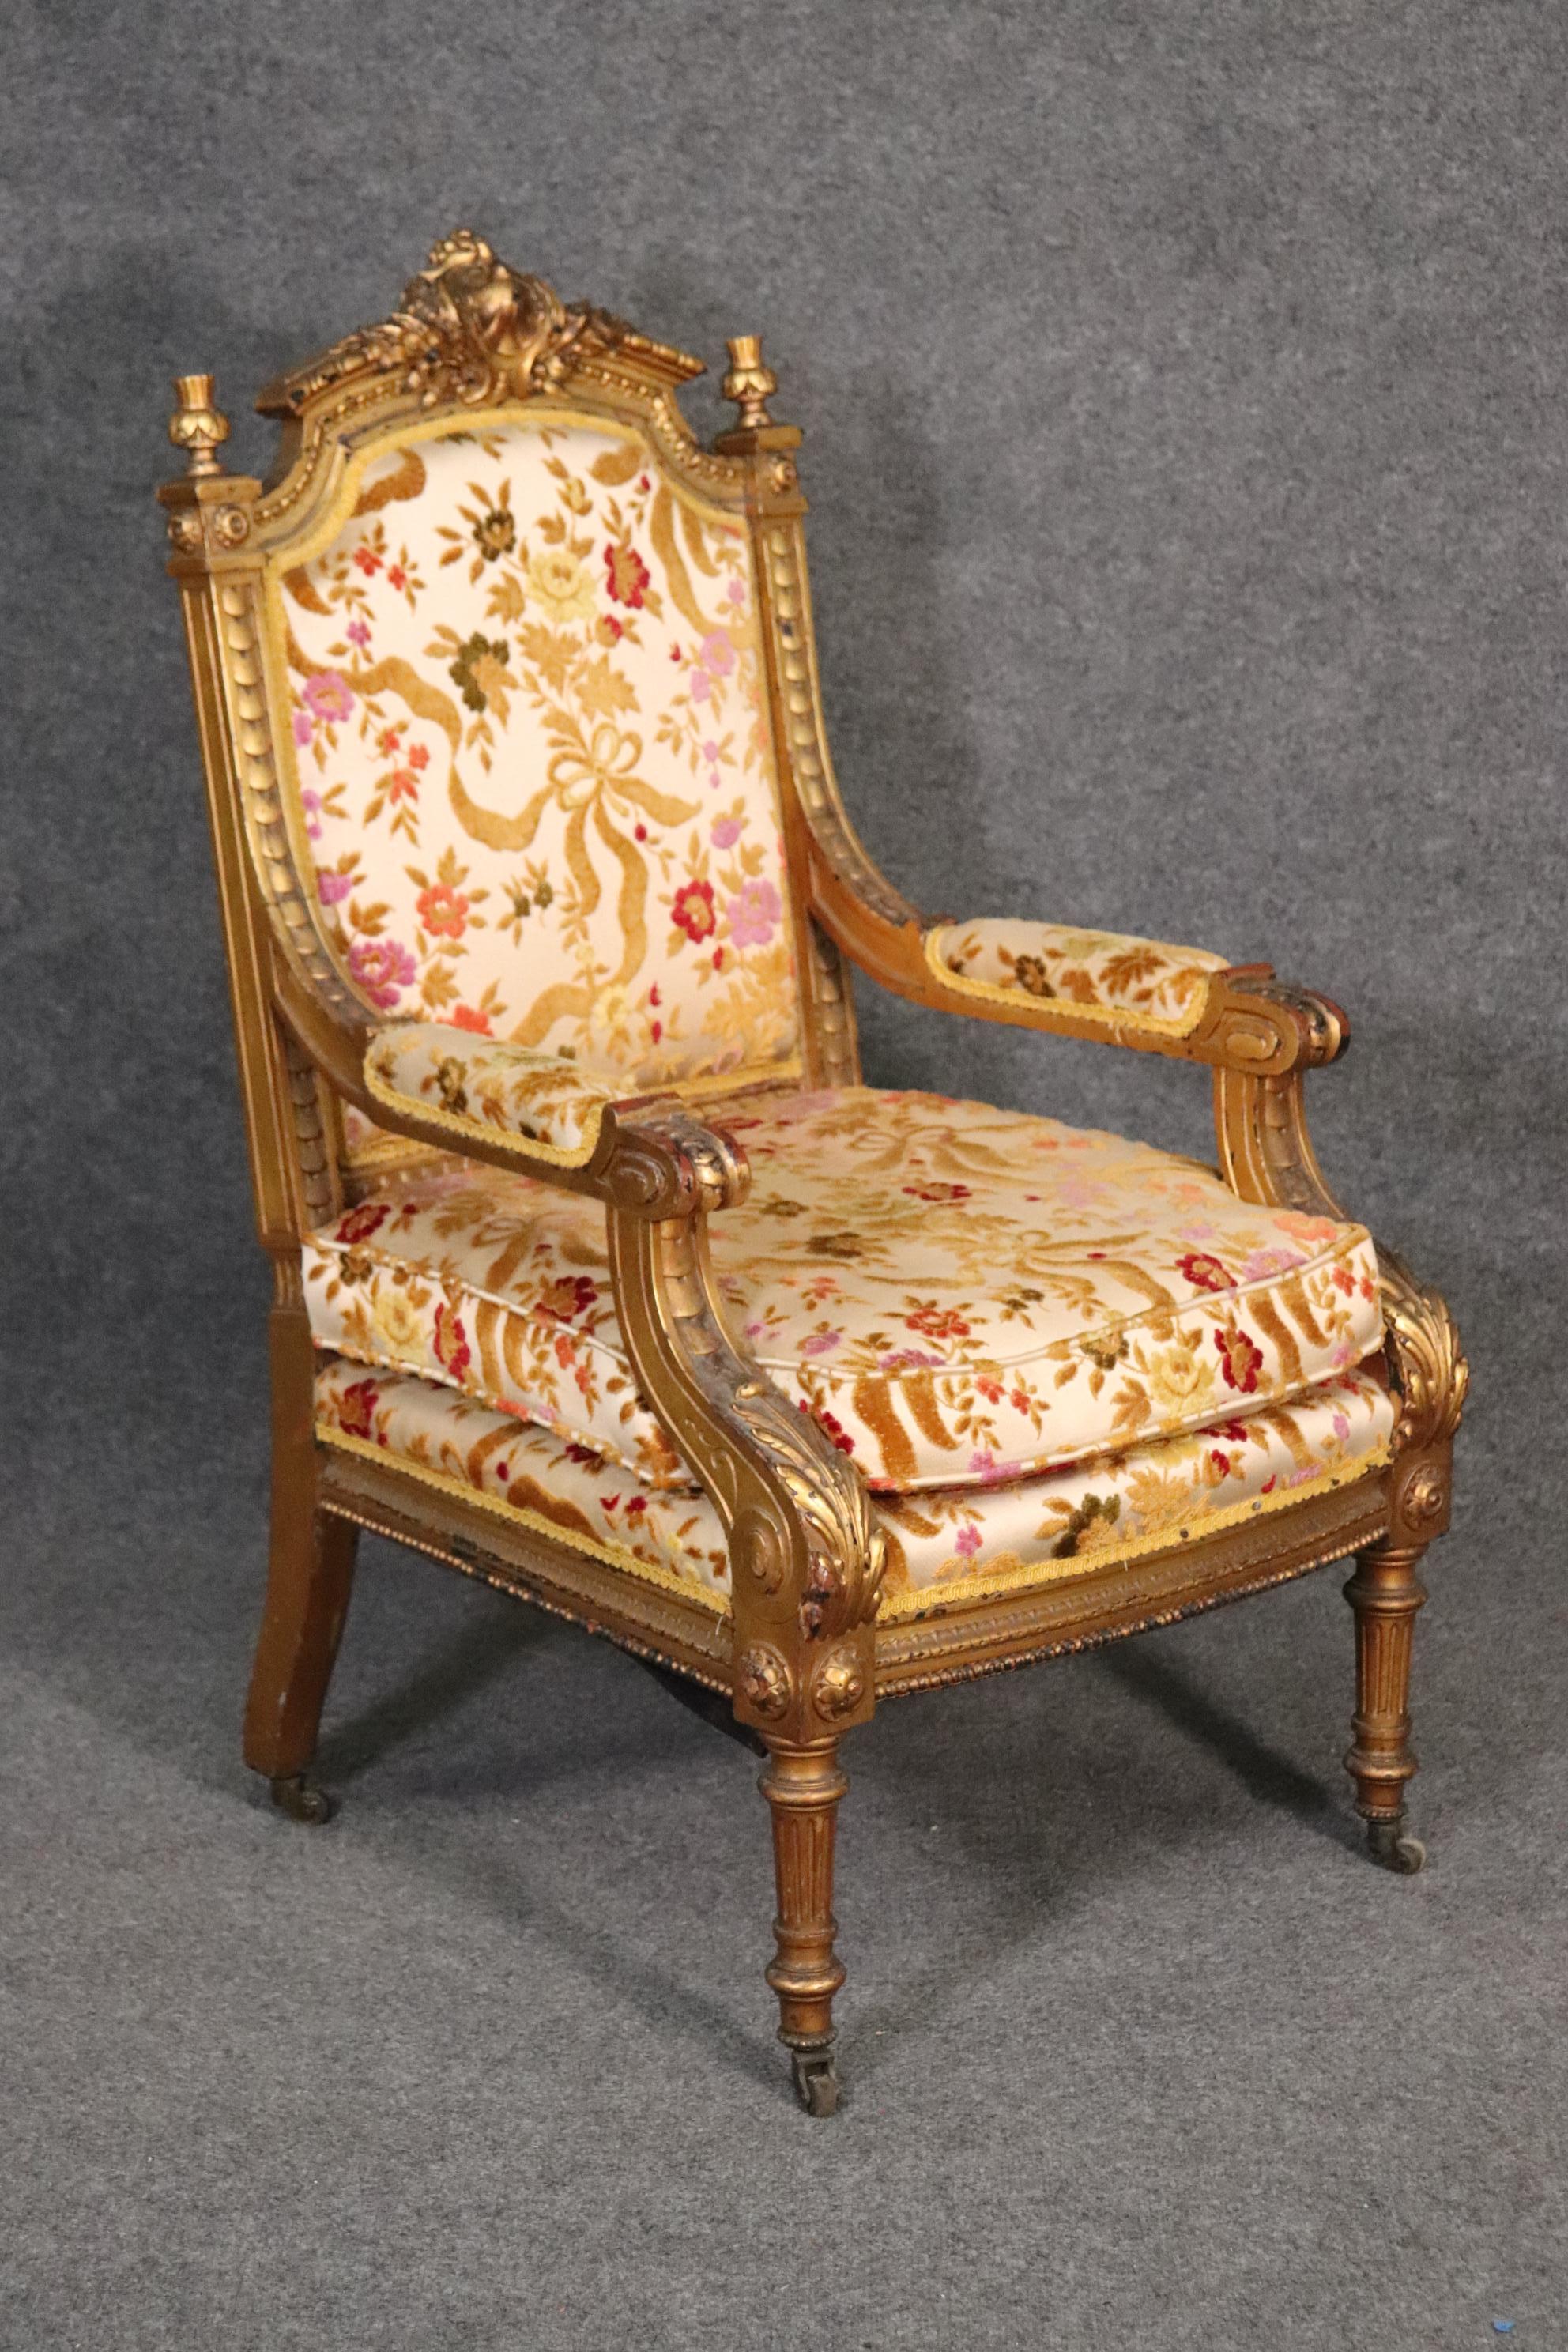 This is a gorgeous gilded French armchair that can easily add some sorely needed character to a corner of a room or next to a neutral sofa or settee. The chair is beautifully made and in it's original upholstery and gilded gold leaf finish. The